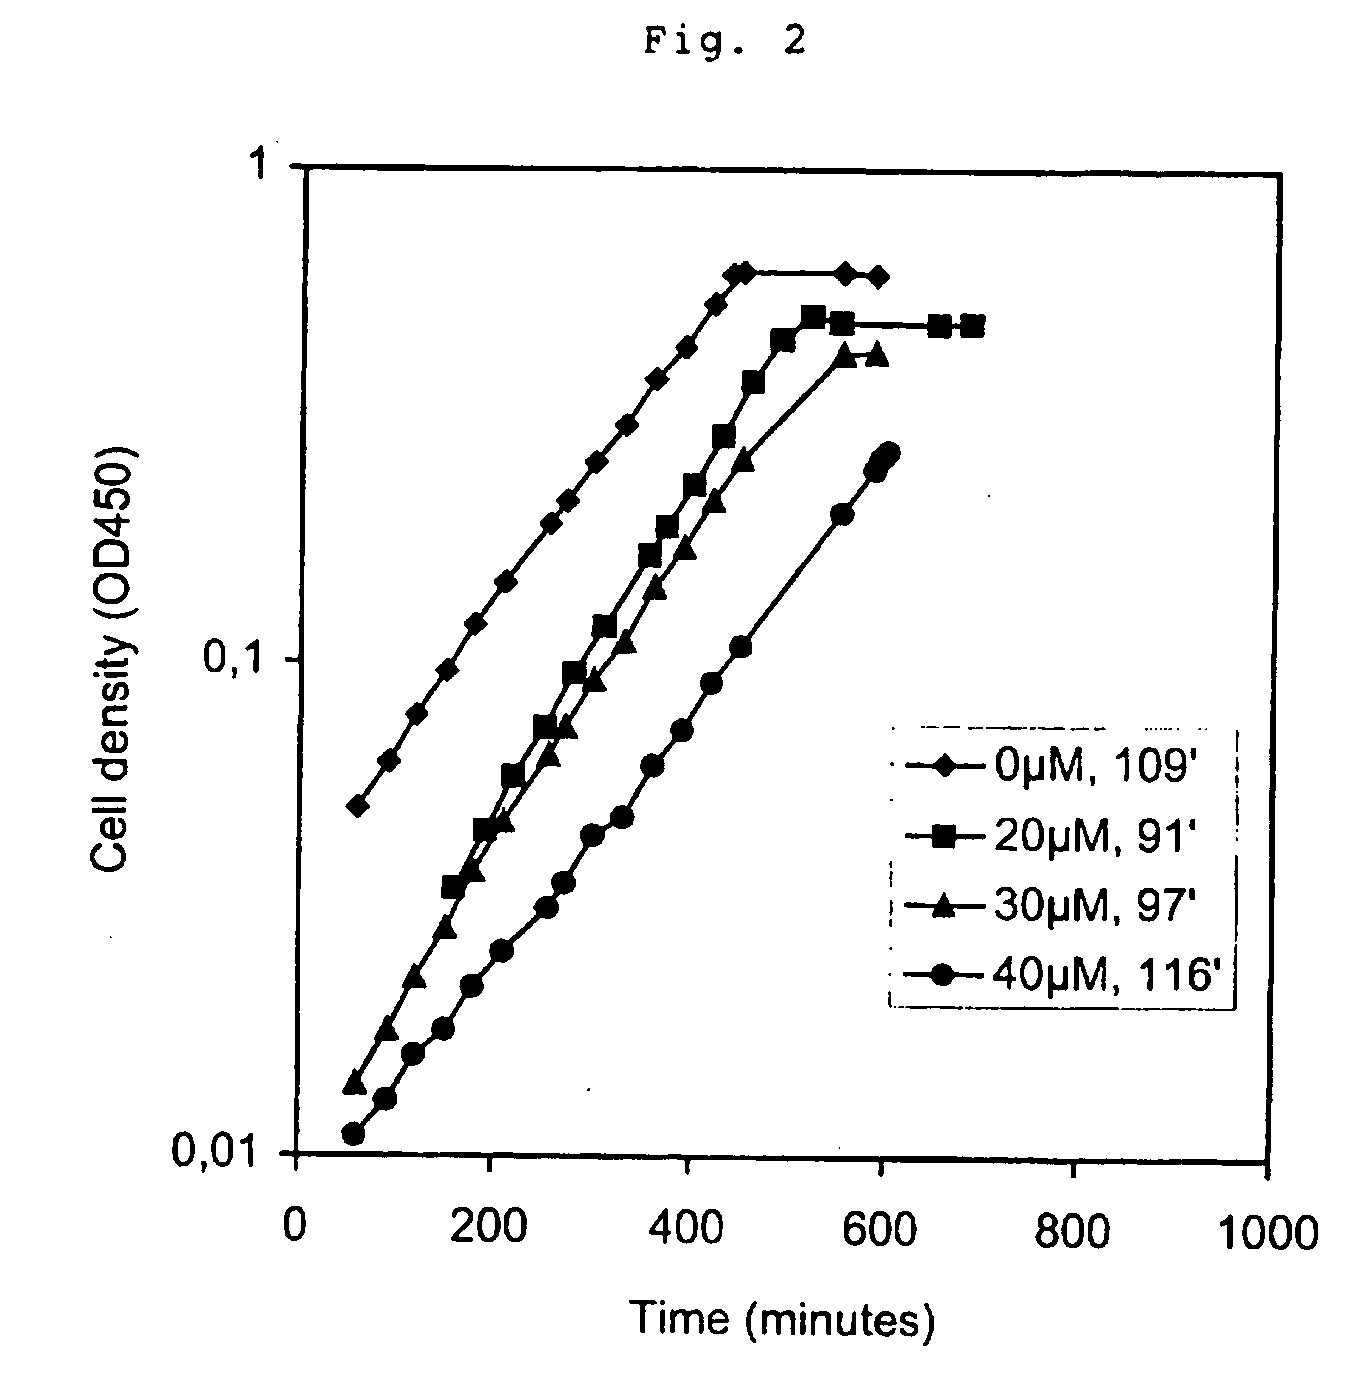 Method of improving the production of biomass or a desired product from a cell